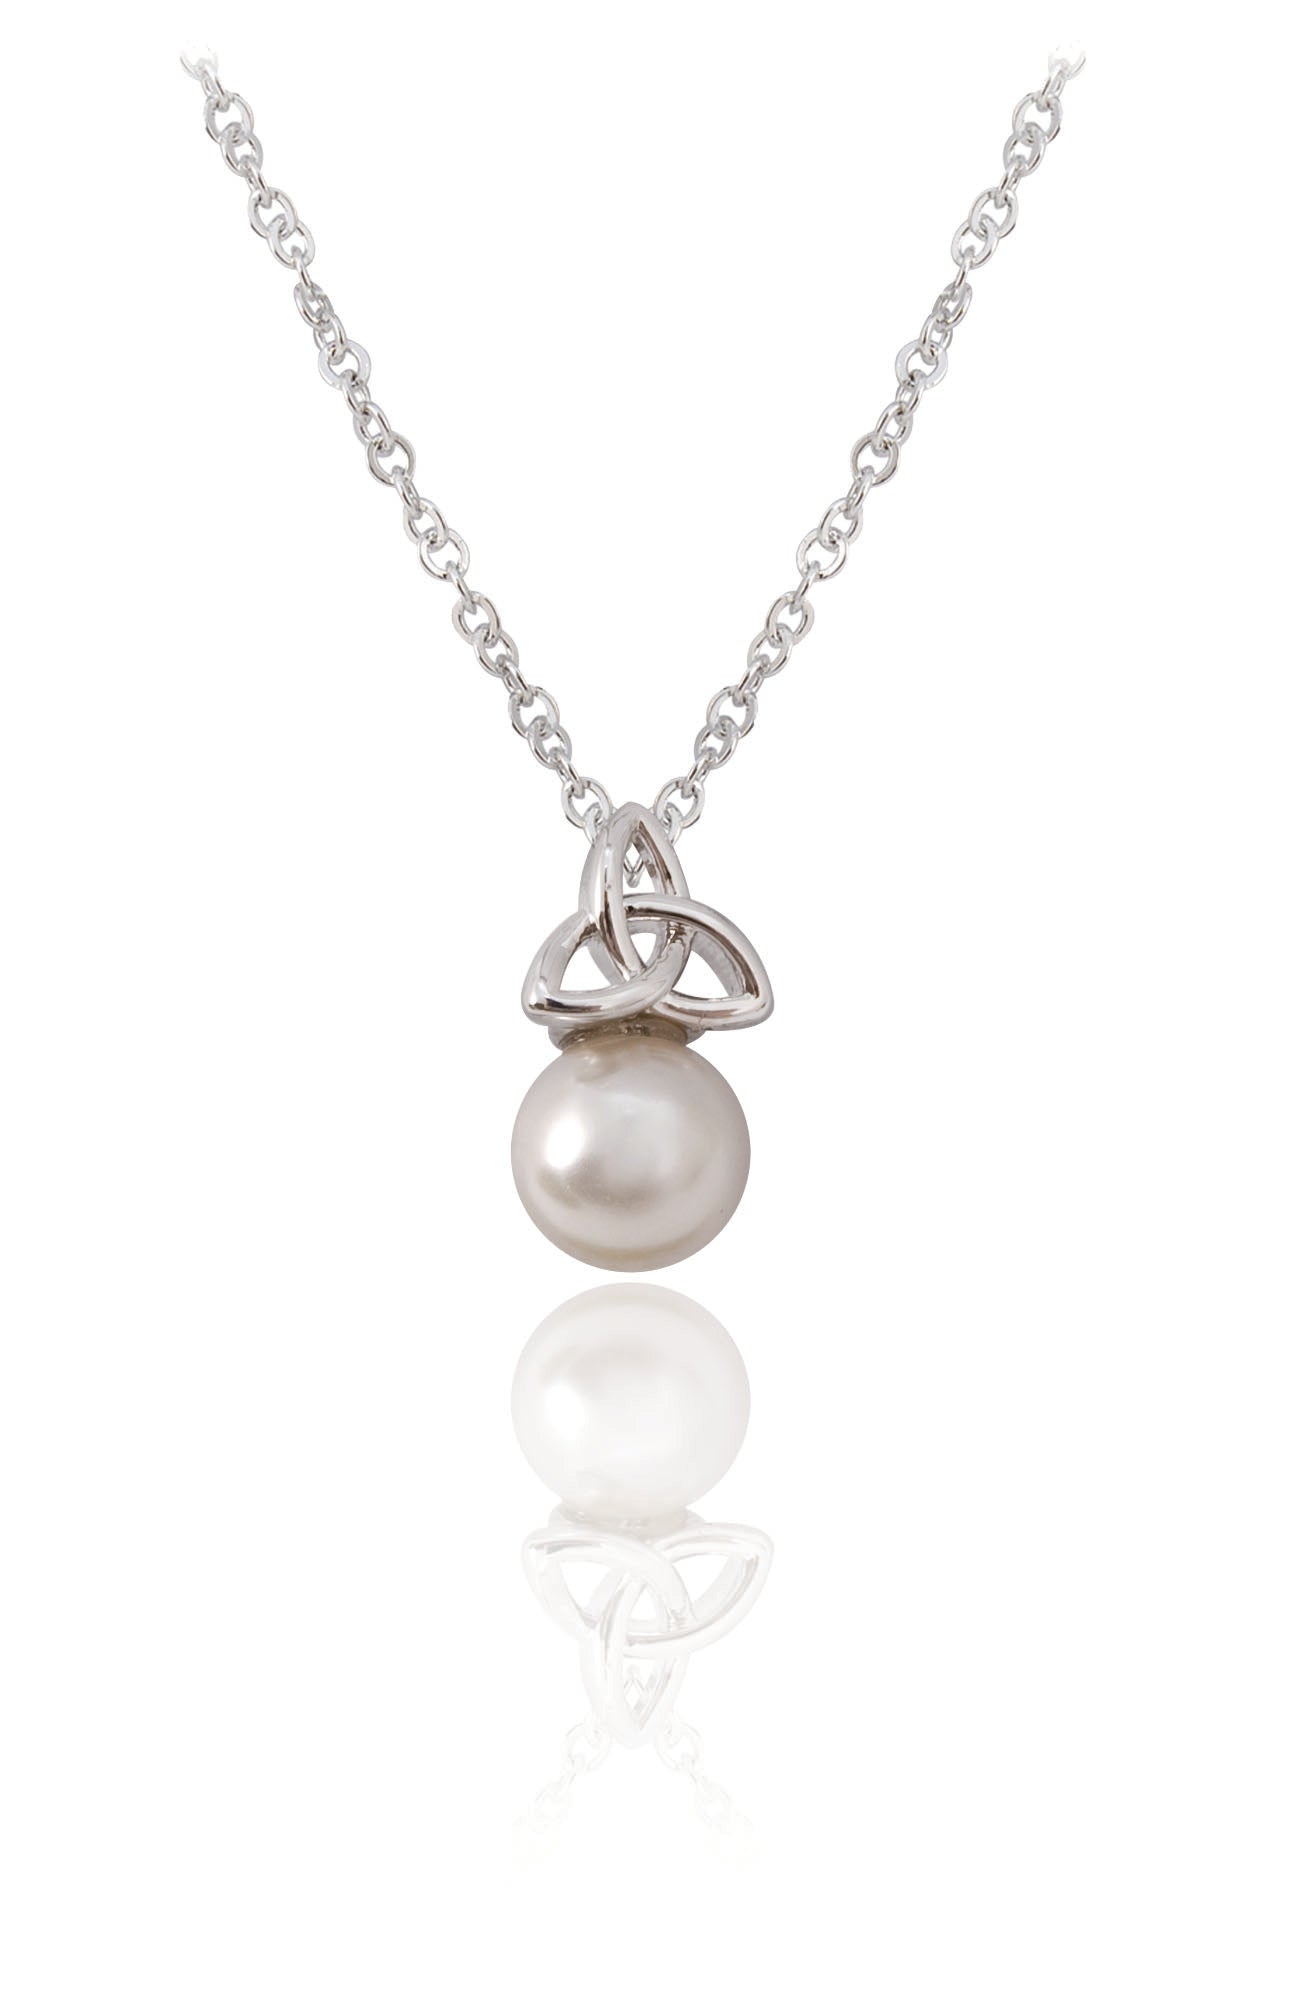 Silver Trinity Knot Pendant with Pearl